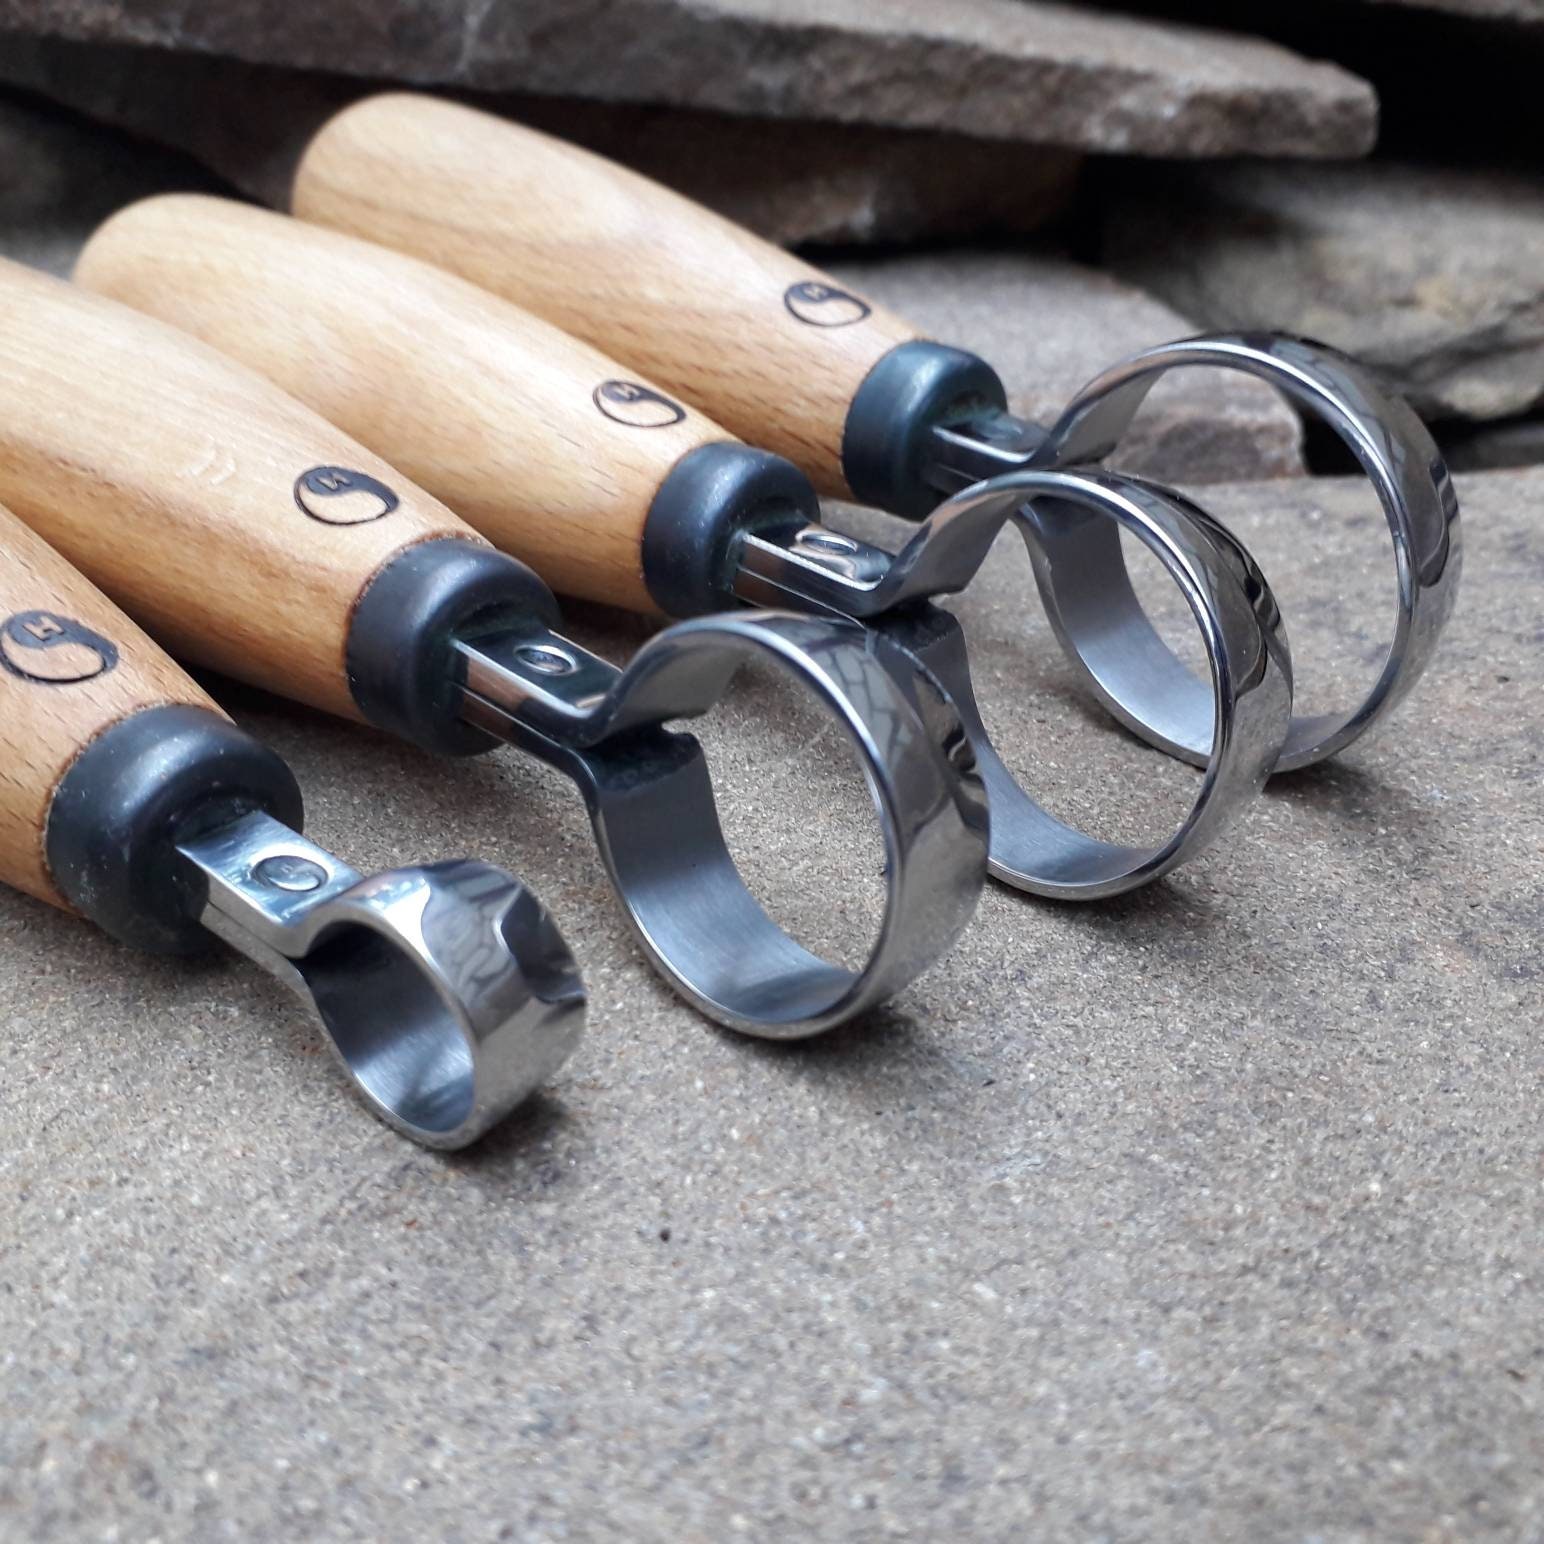 Hand Forged Tool Scorp. Tools for Carving Spoons. Wood Carving